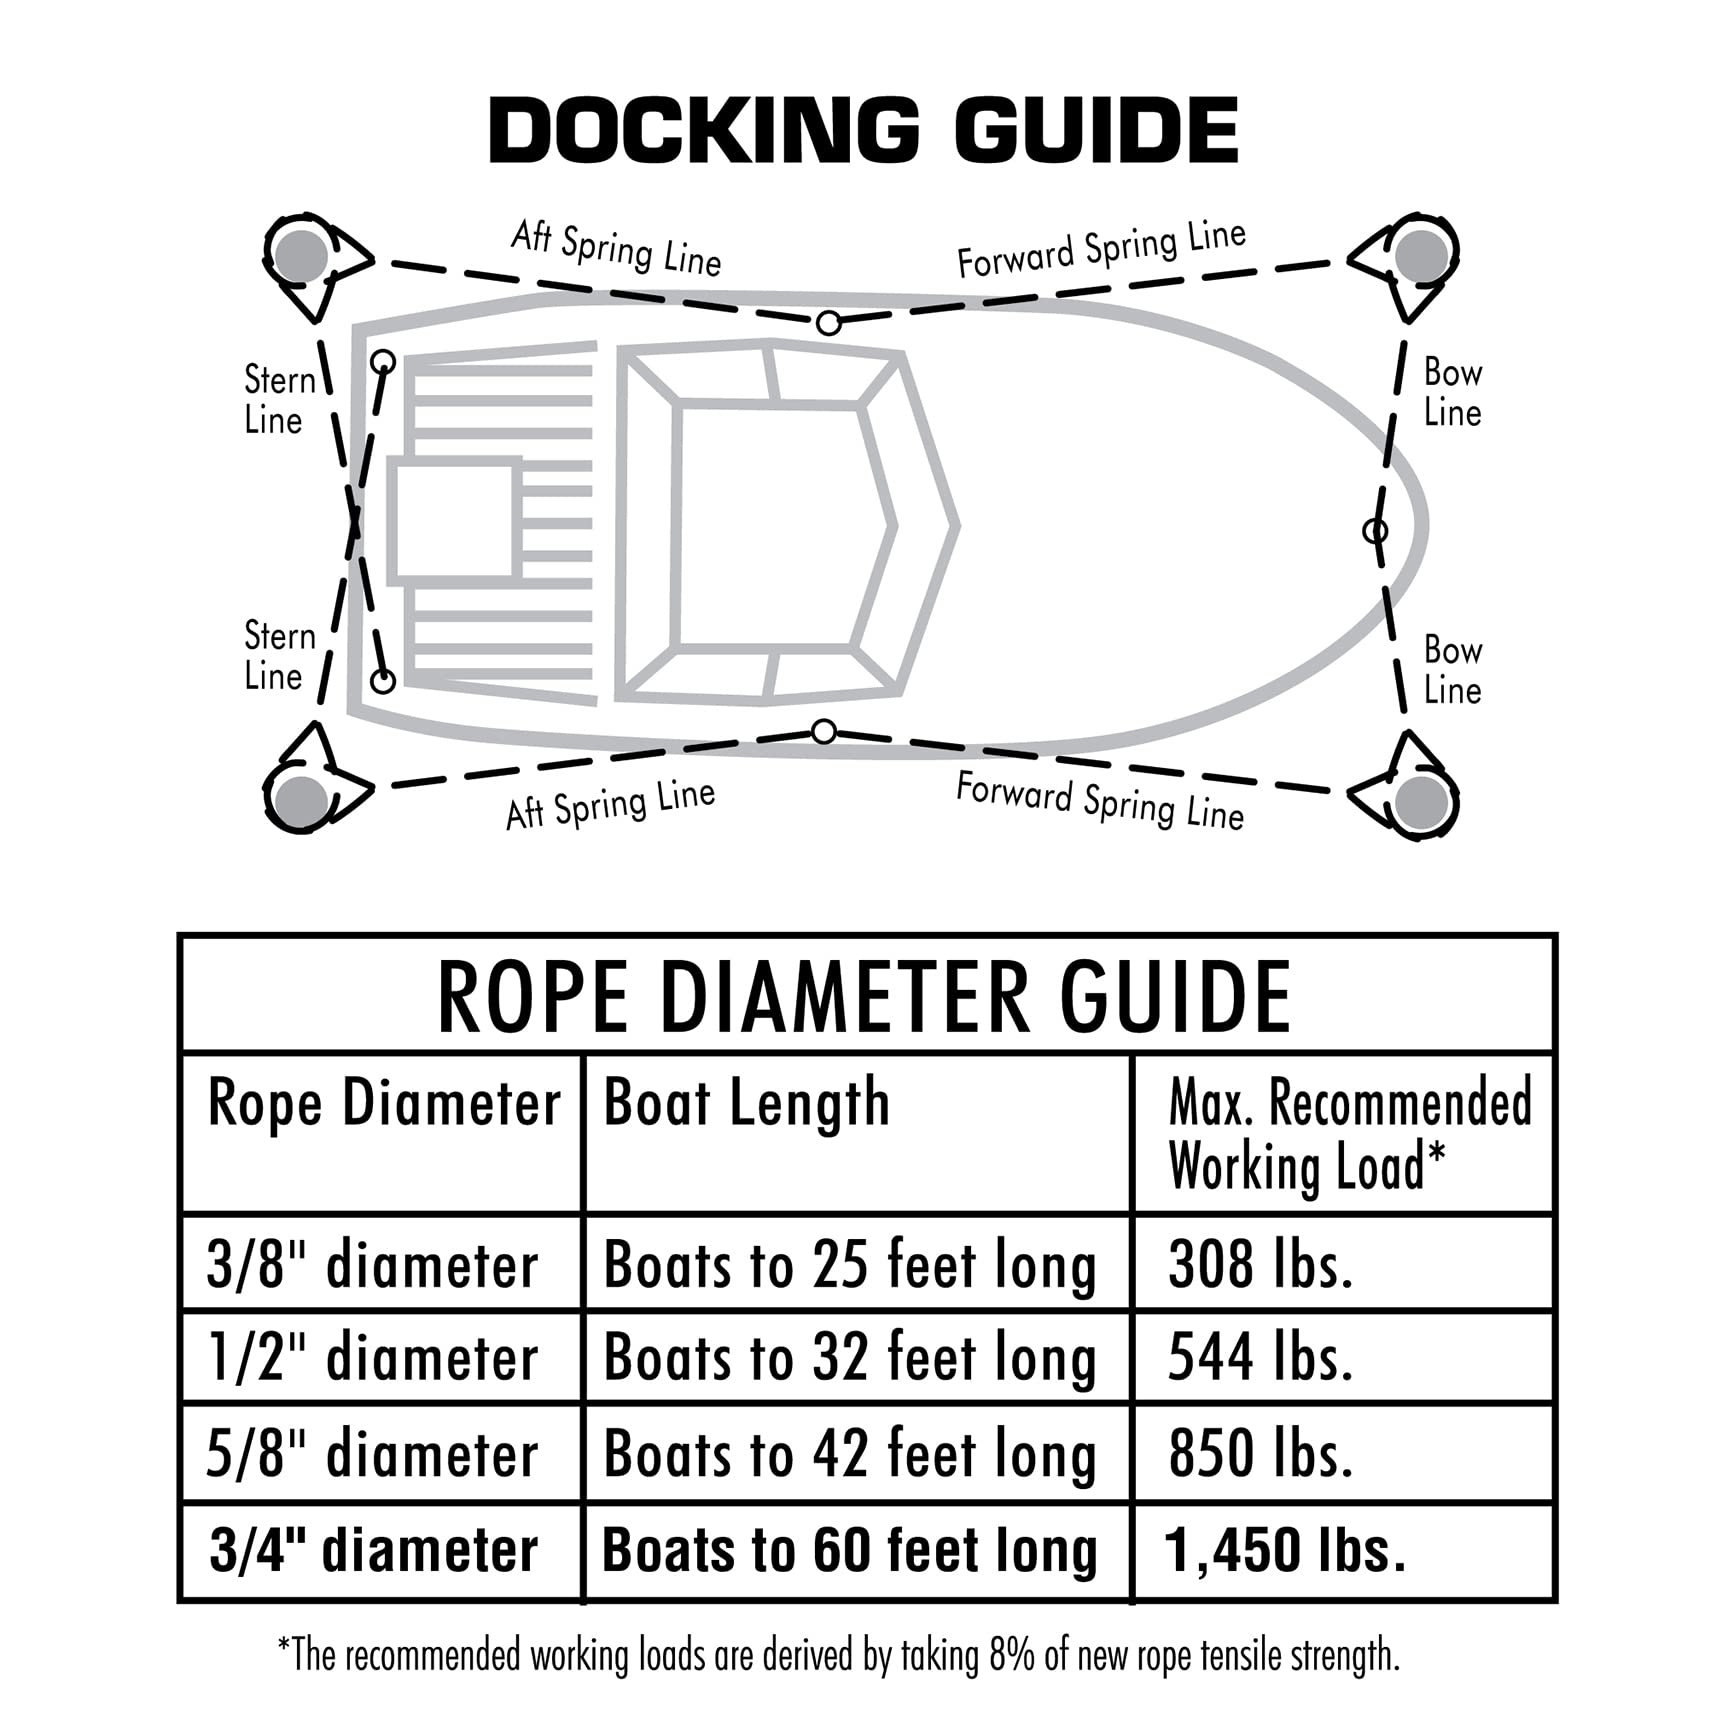 Seachoice 42431 Dock Rope for Boating - Double-Braid MFP Dock Line